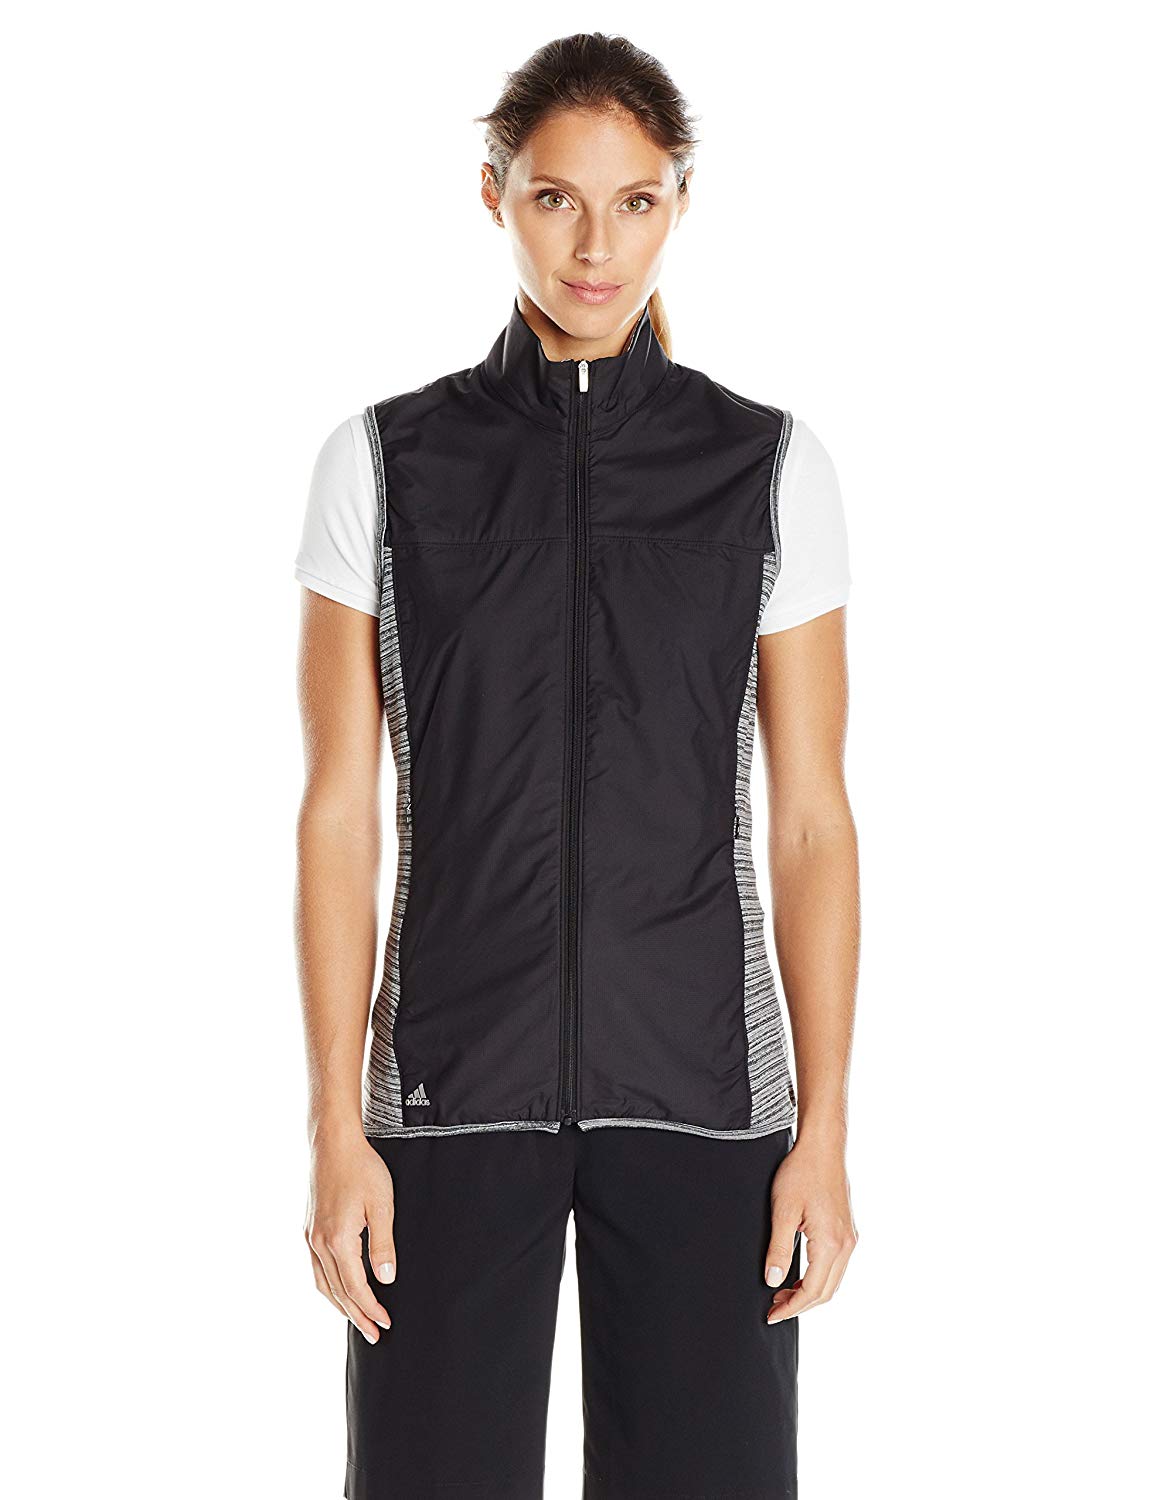 Buy Adidas Womens Golf Vests for Best Prices Online!